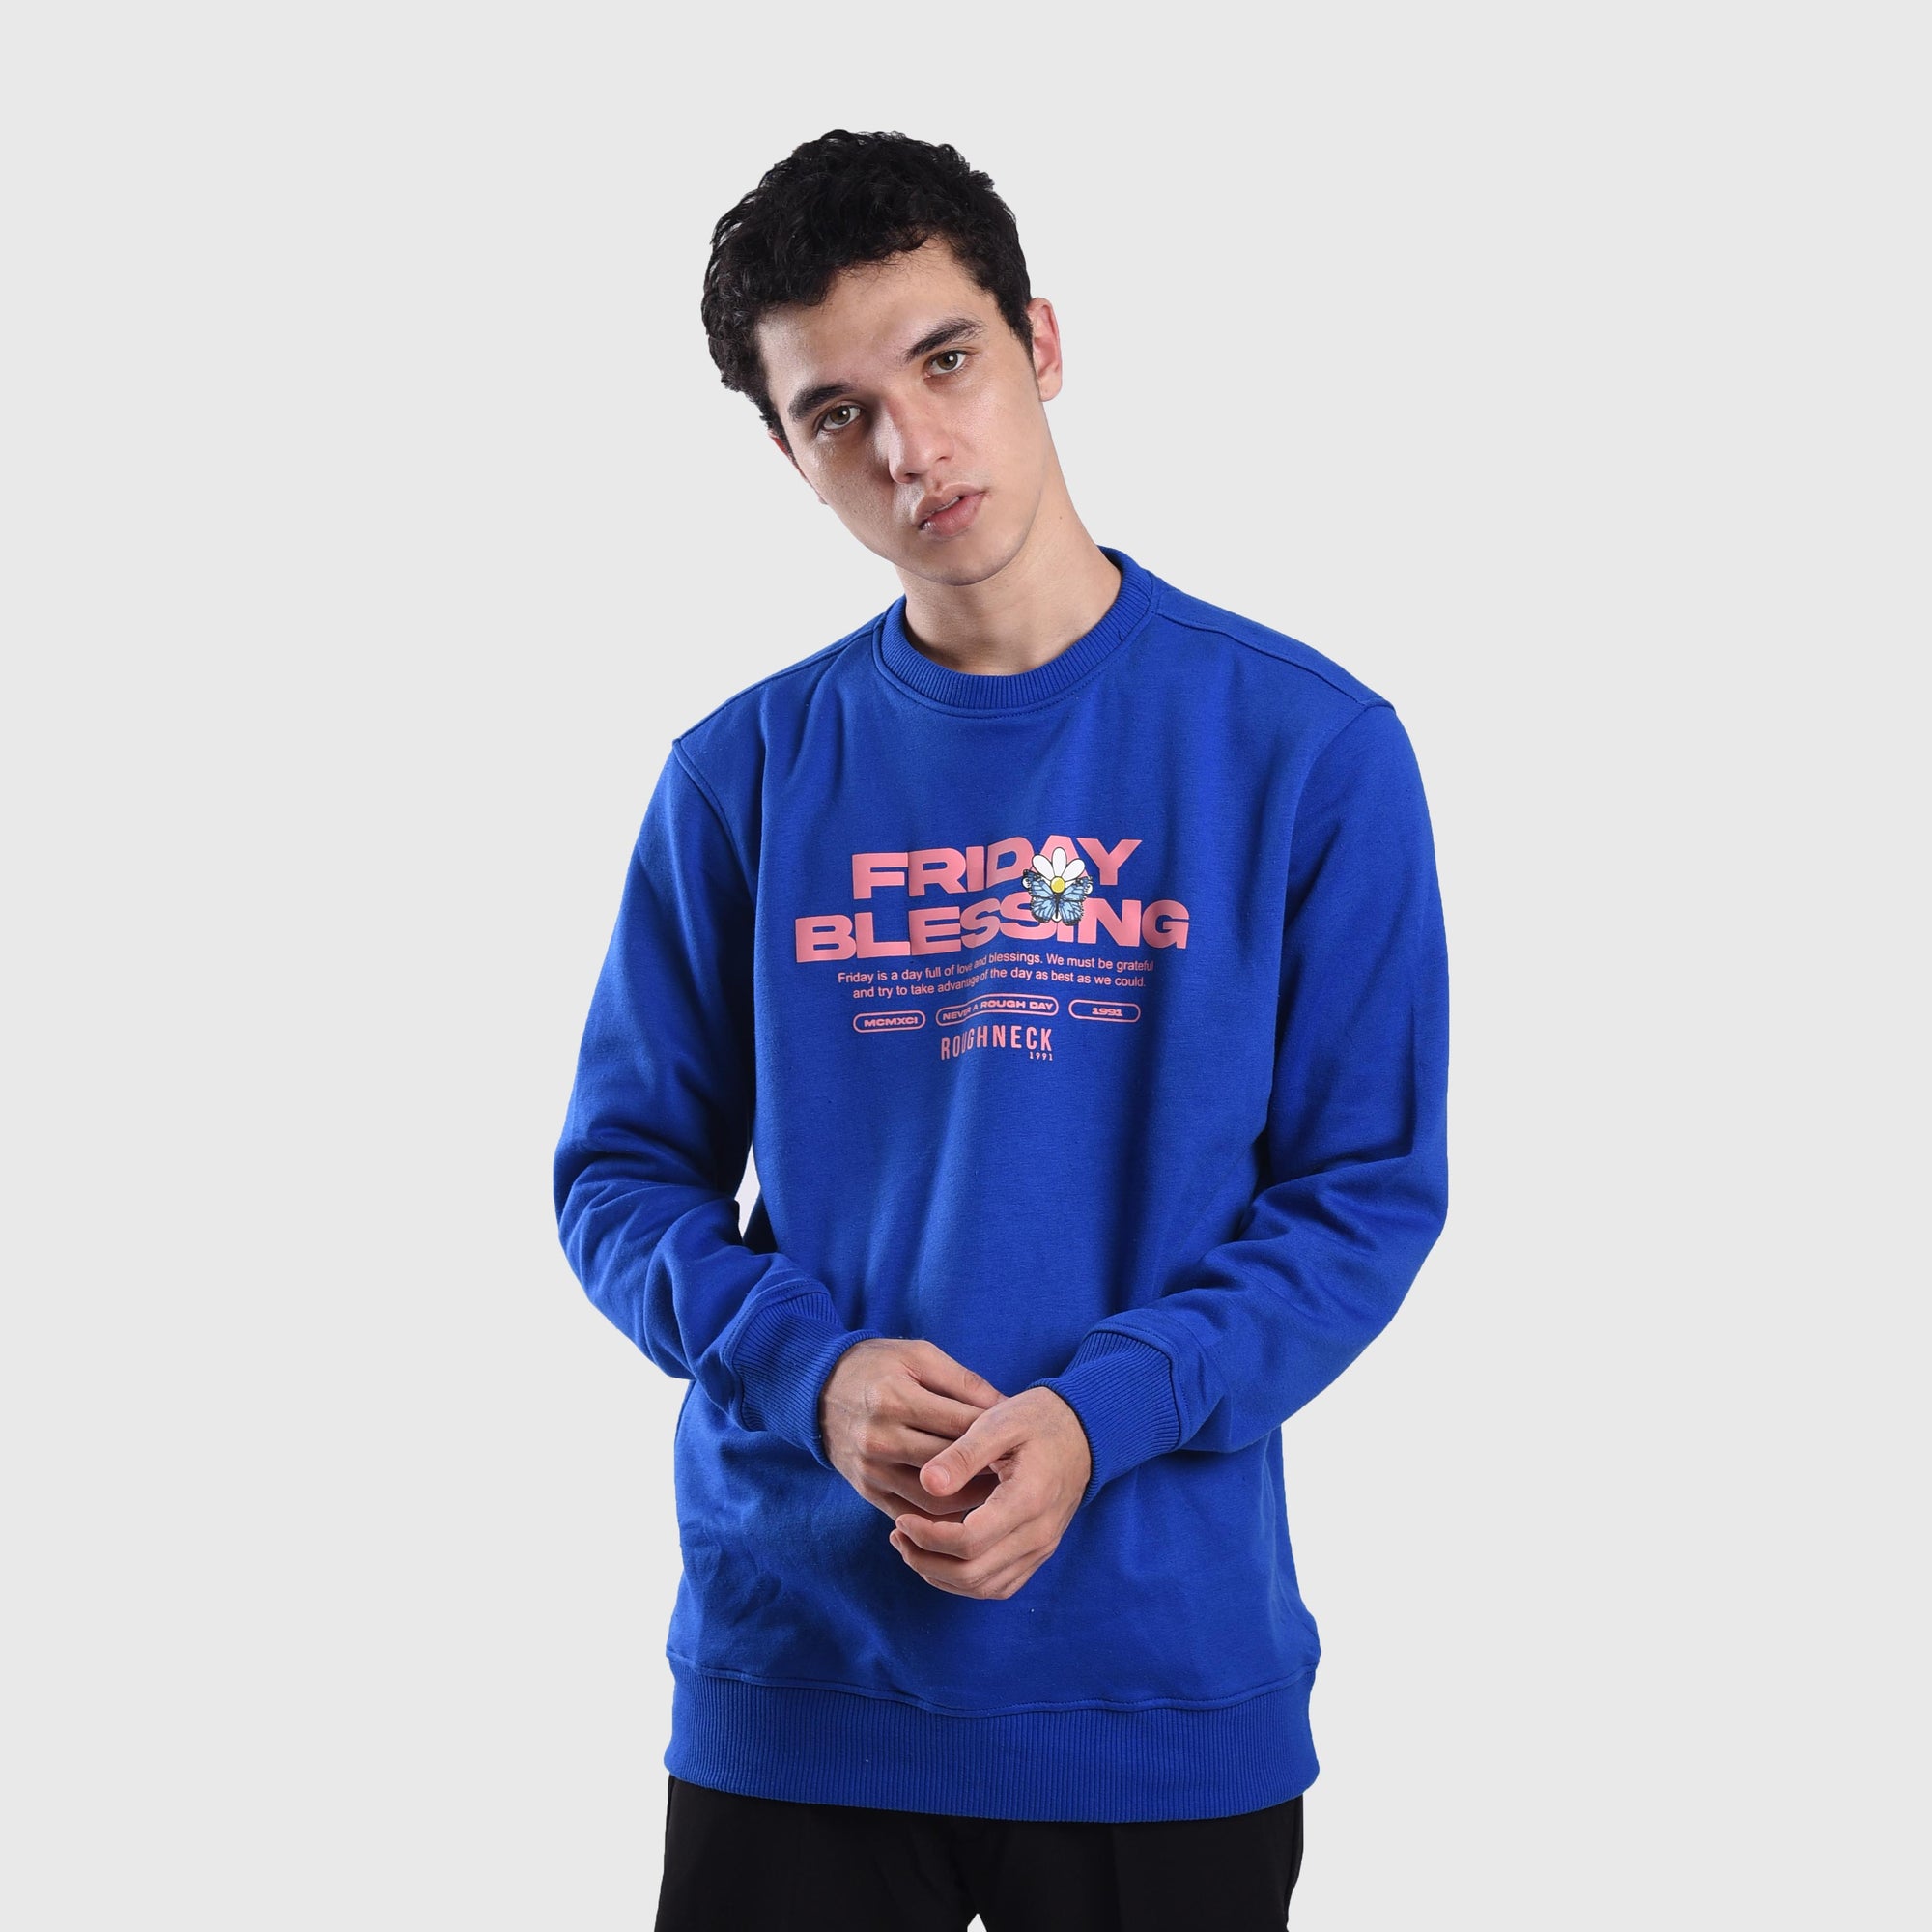 SS520 Oxford Blue Friday Blessing Crewneck